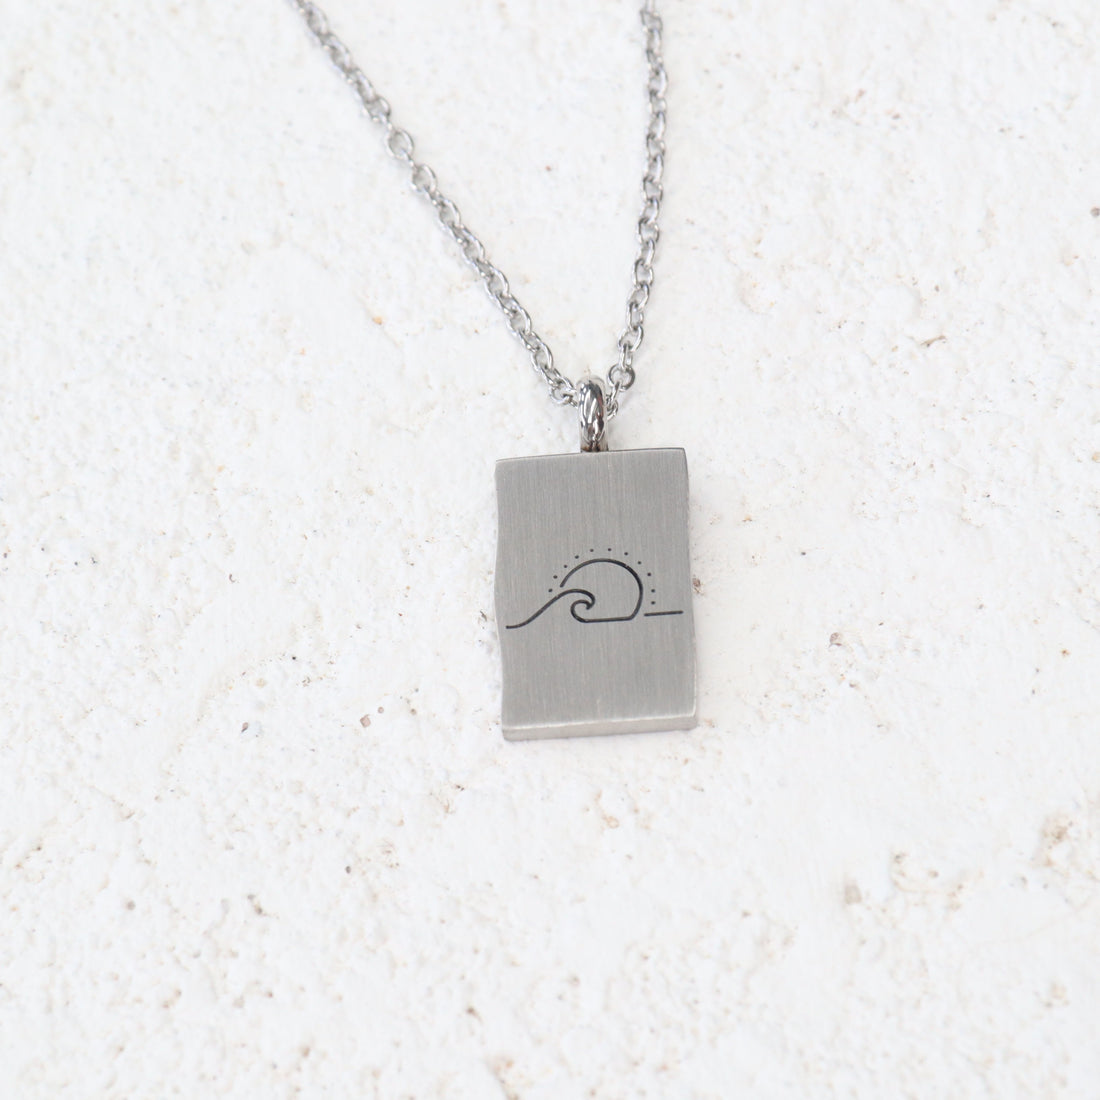 Riding the Waves Stainless Steel Pendant Necklace